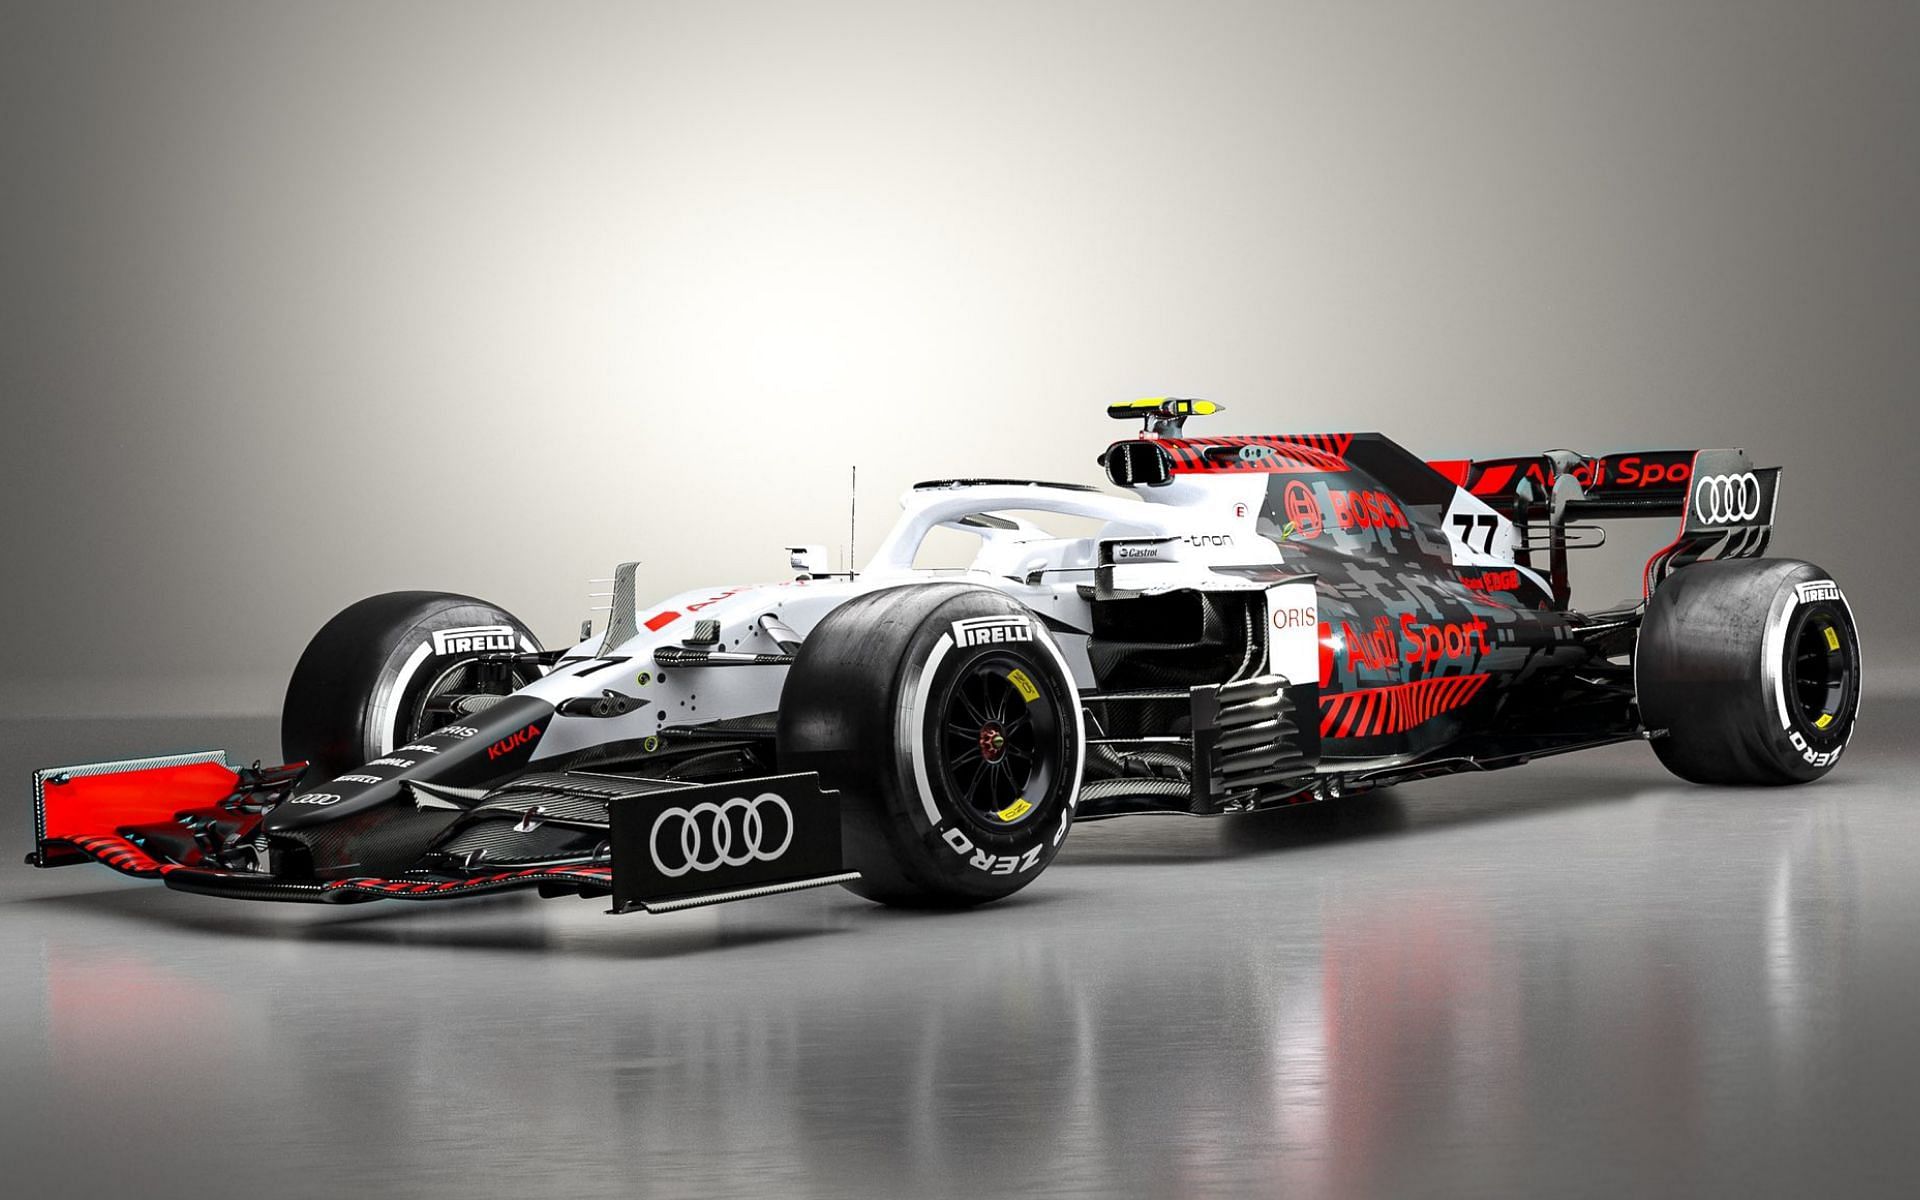 Concept image showing a current-generation F1 car in an Audi livery. Courtesy: Twitter/seanbulldesign